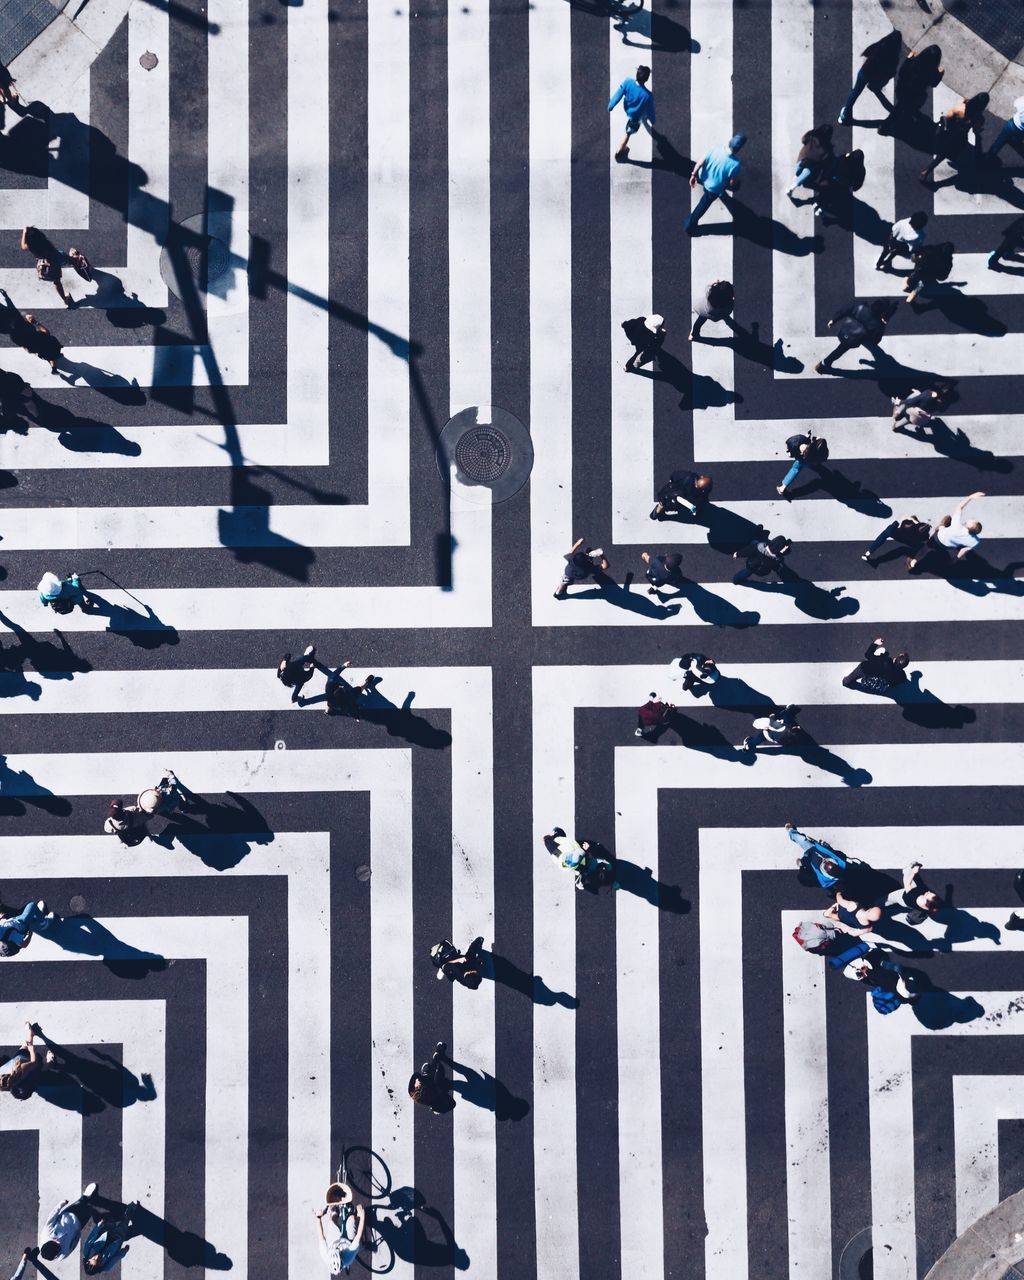 high angle view, day, group of people, sunlight, real people, in a row, shadow, crowd, large group of people, architecture, transportation, walking, nature, road marking, crossing, outdoors, security, zebra crossing, street